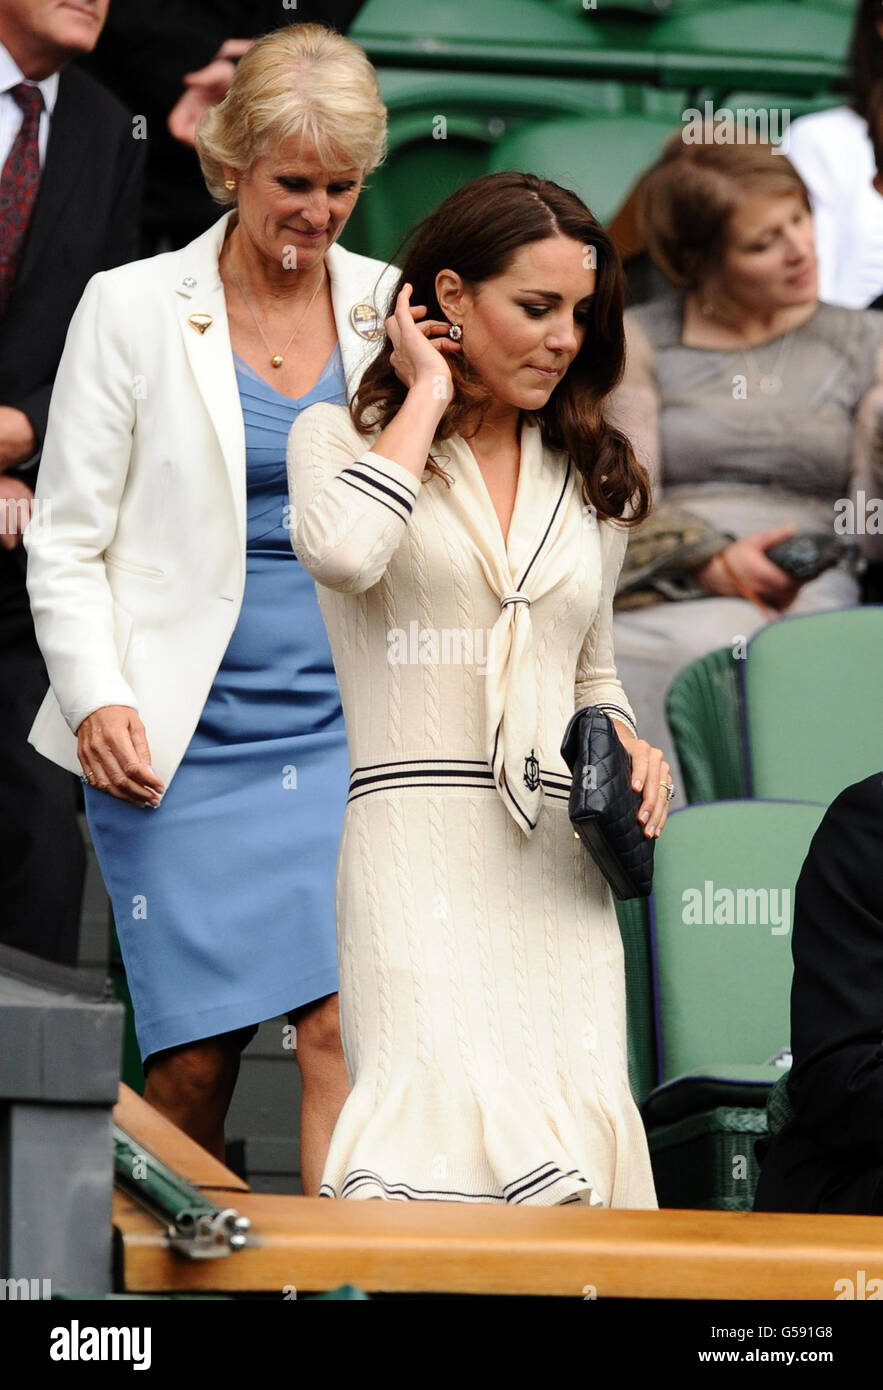 The Duchess of Cambridge arrives in the Royal Box during day nine of the 2012 Wimbledon Championships at the All England Lawn Tennis Club, Wimbledon. Stock Photo